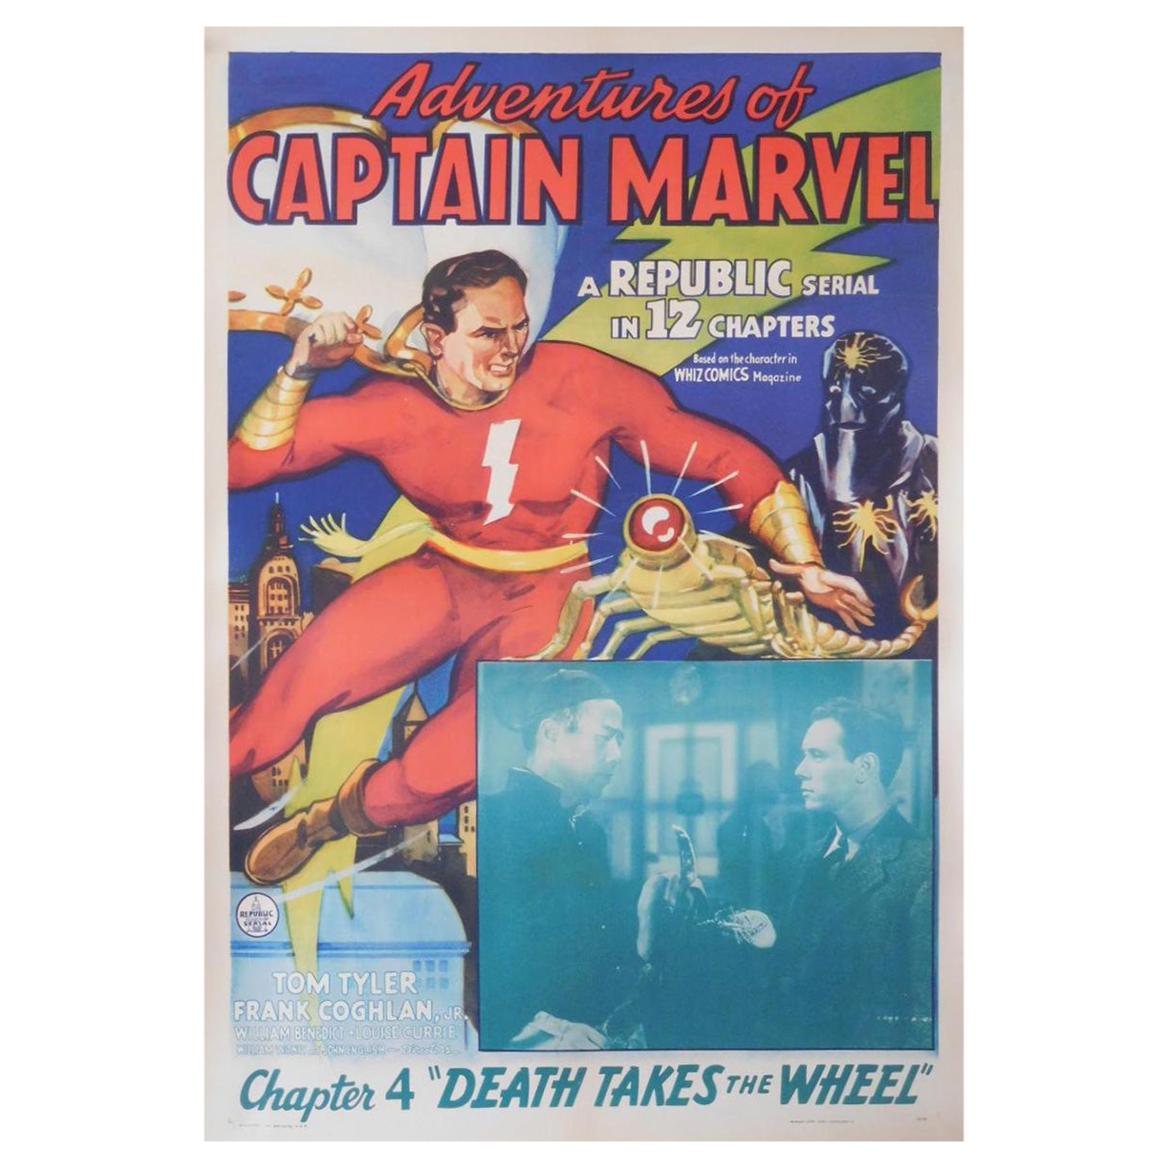 "Adventures of Captain Marvel" '1941' Poster For Sale